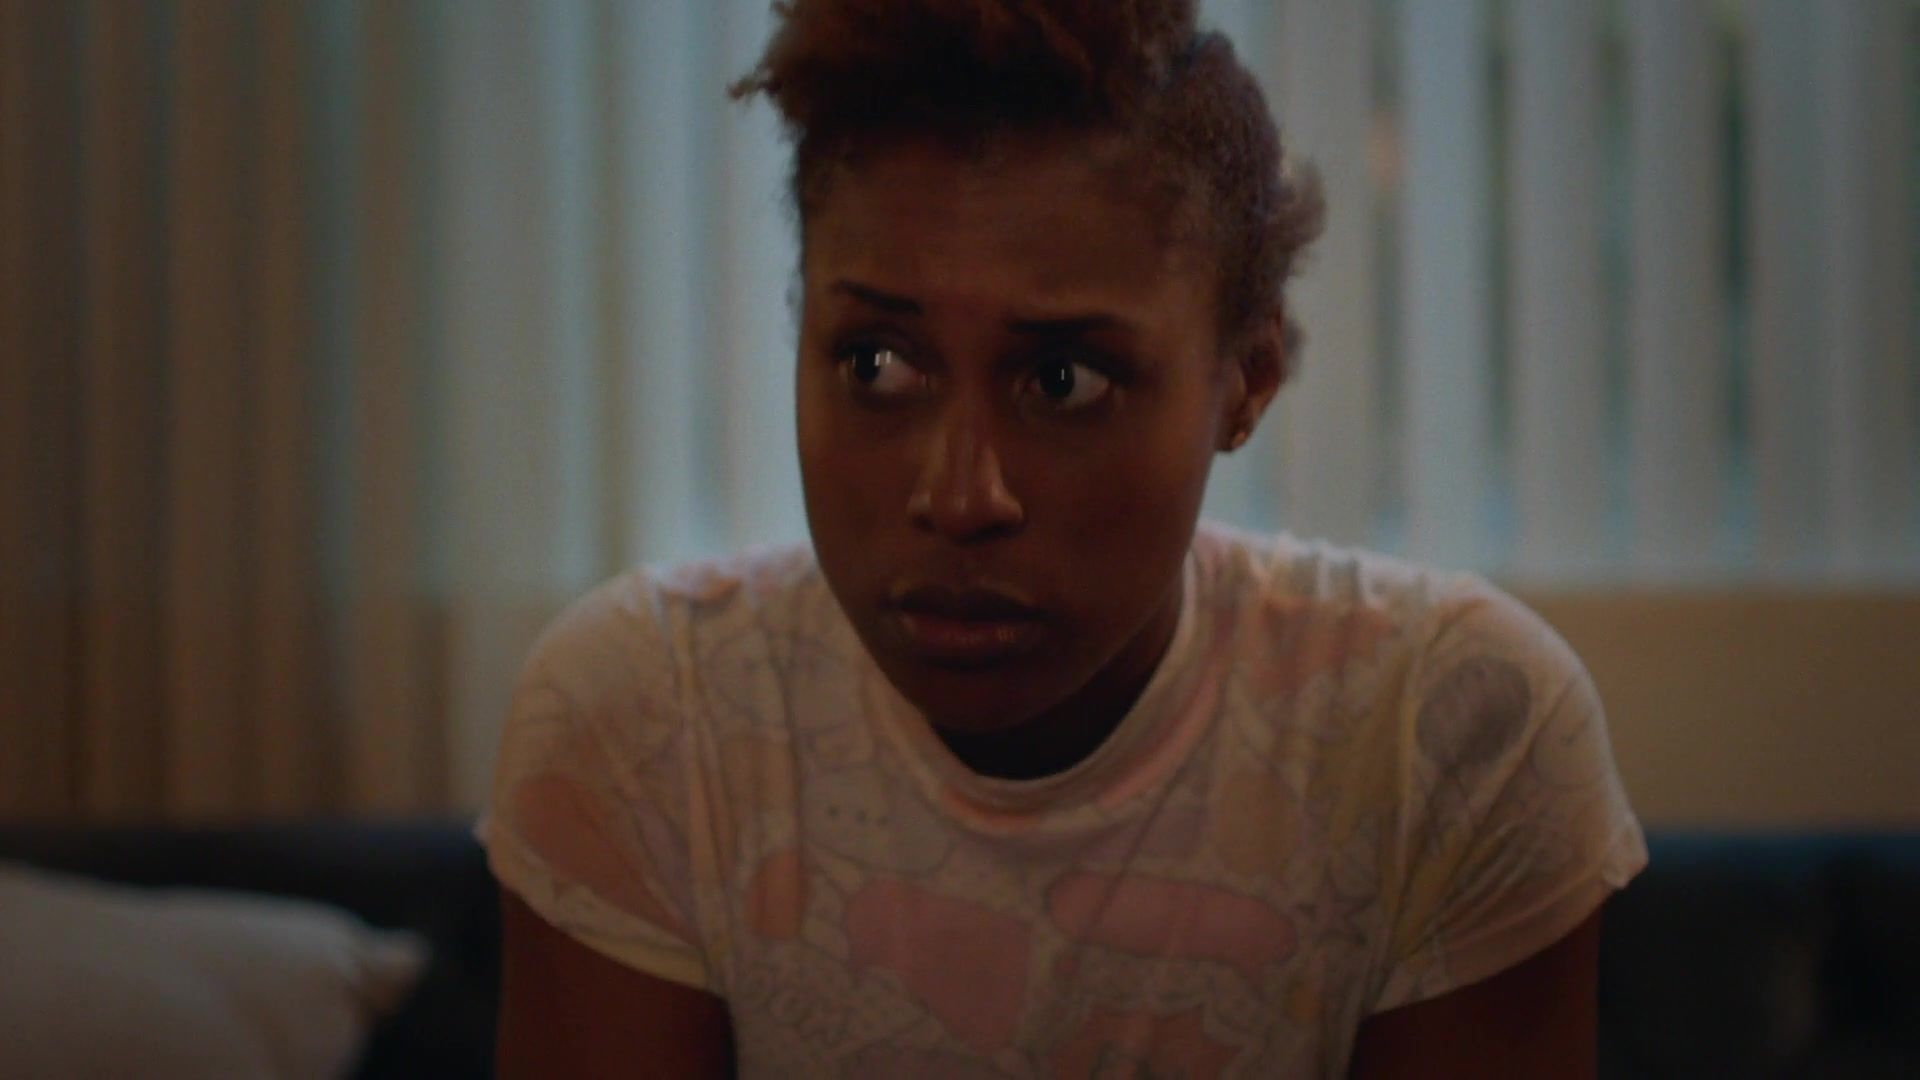 Amateurs Gone Domnique Perry naked, Issa Rae Naked - Insecure s02e01 (2017) BBCSluts